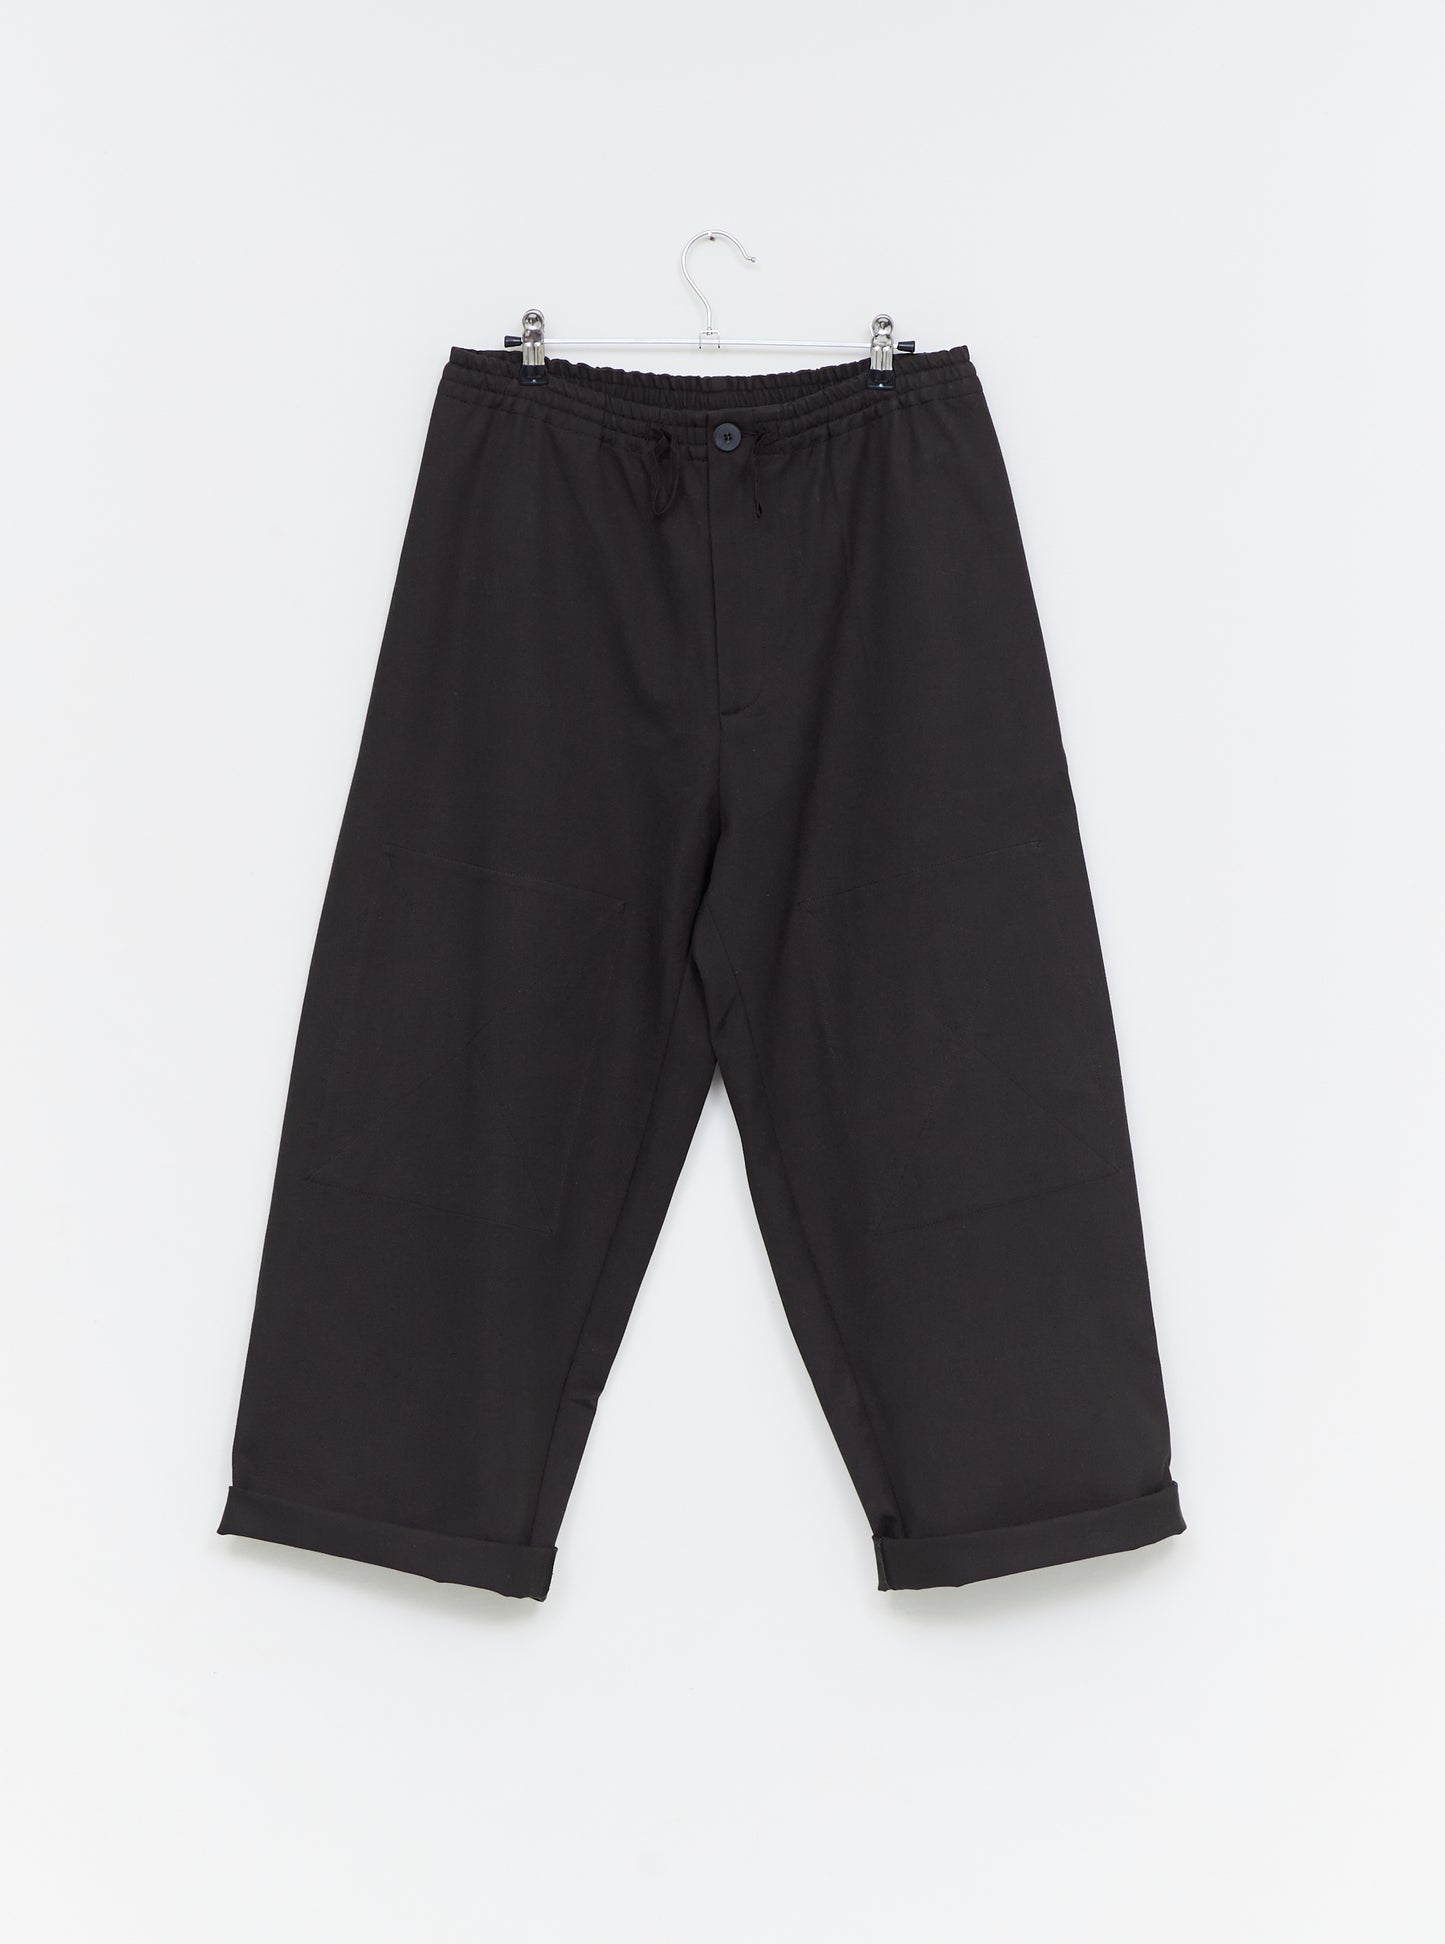 Gatherers Trousers- Clove Twill